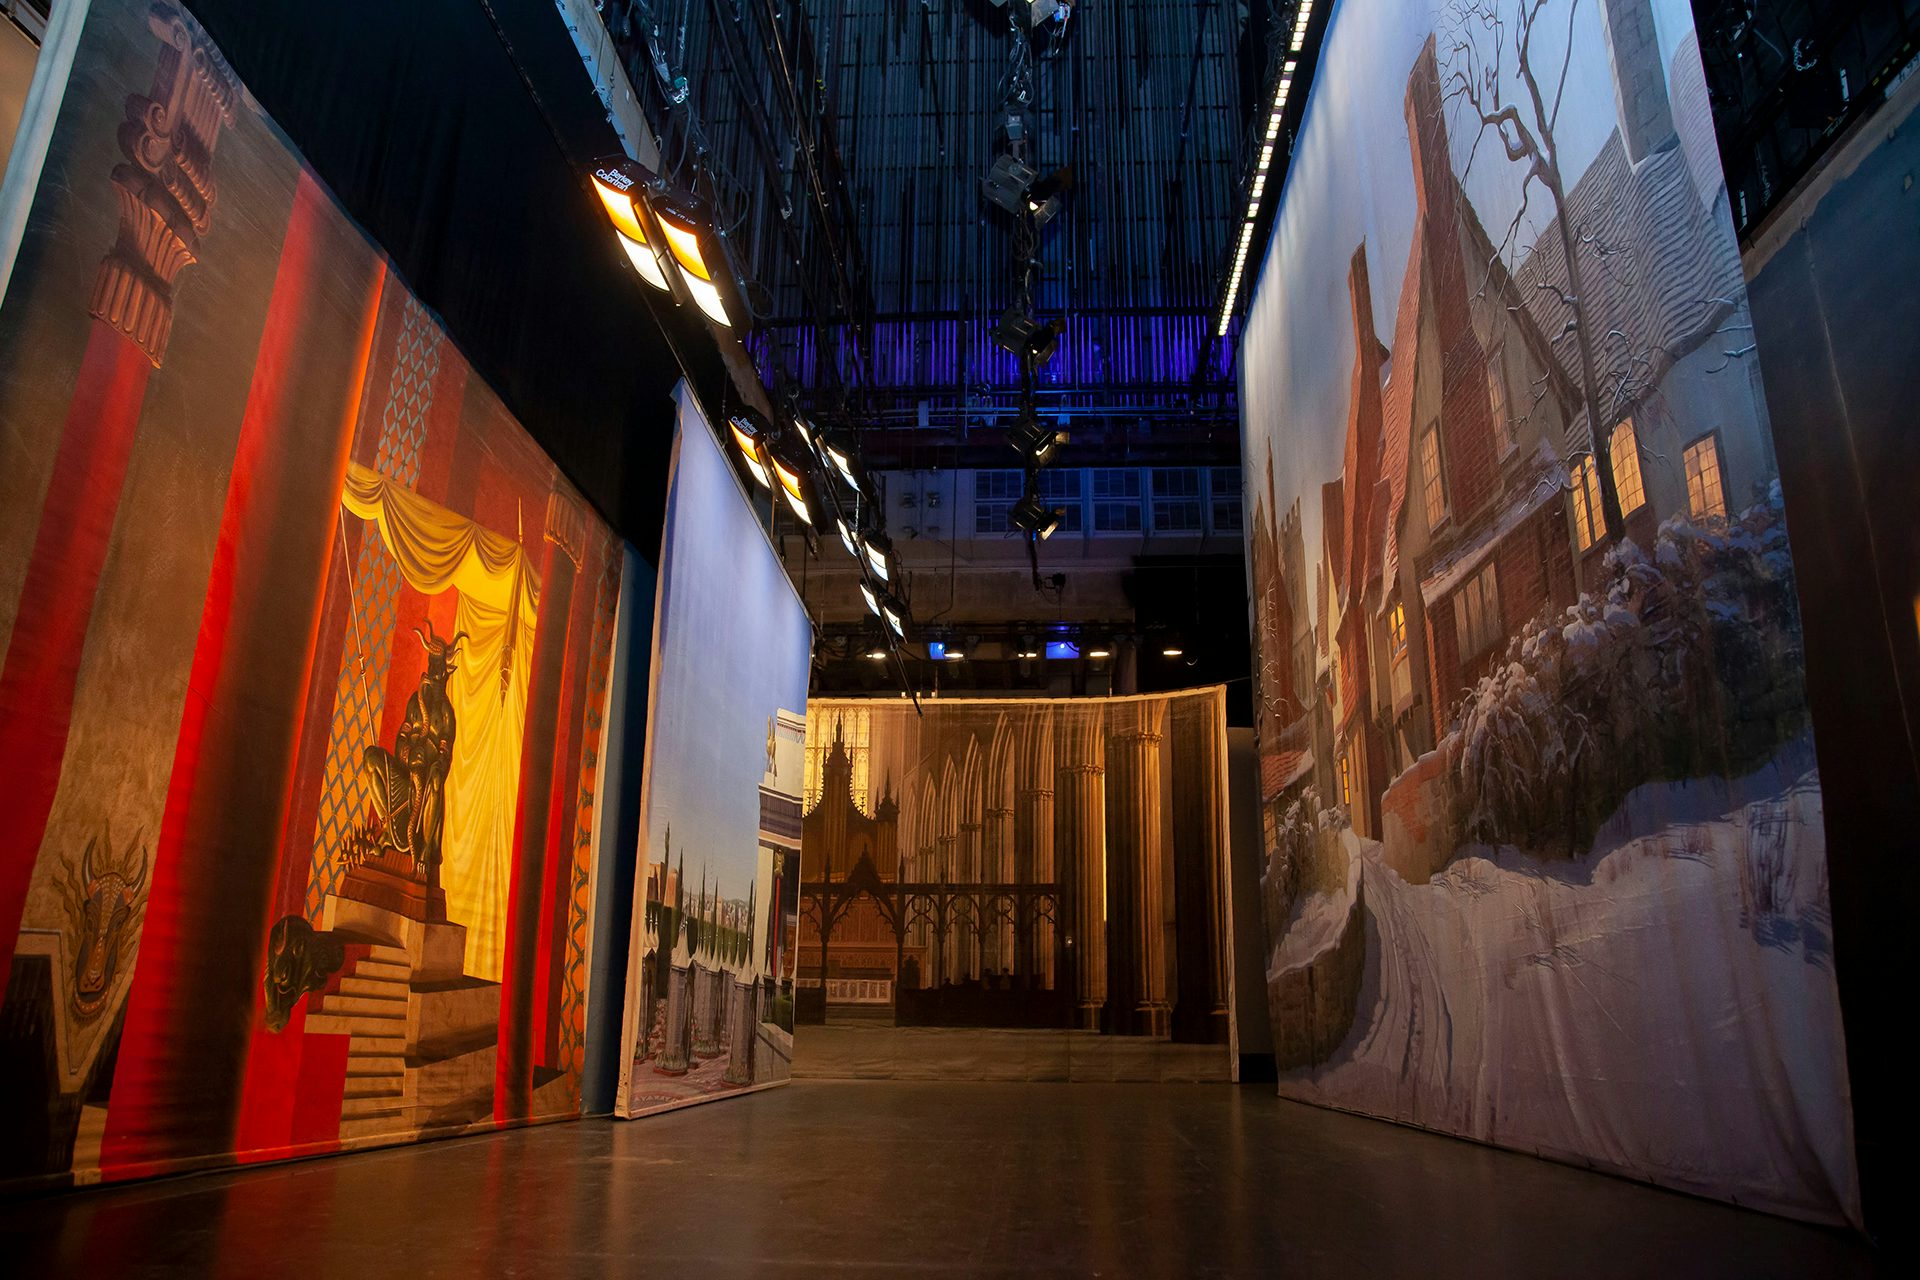 Photograph of the exhibition space featuring large backdrops